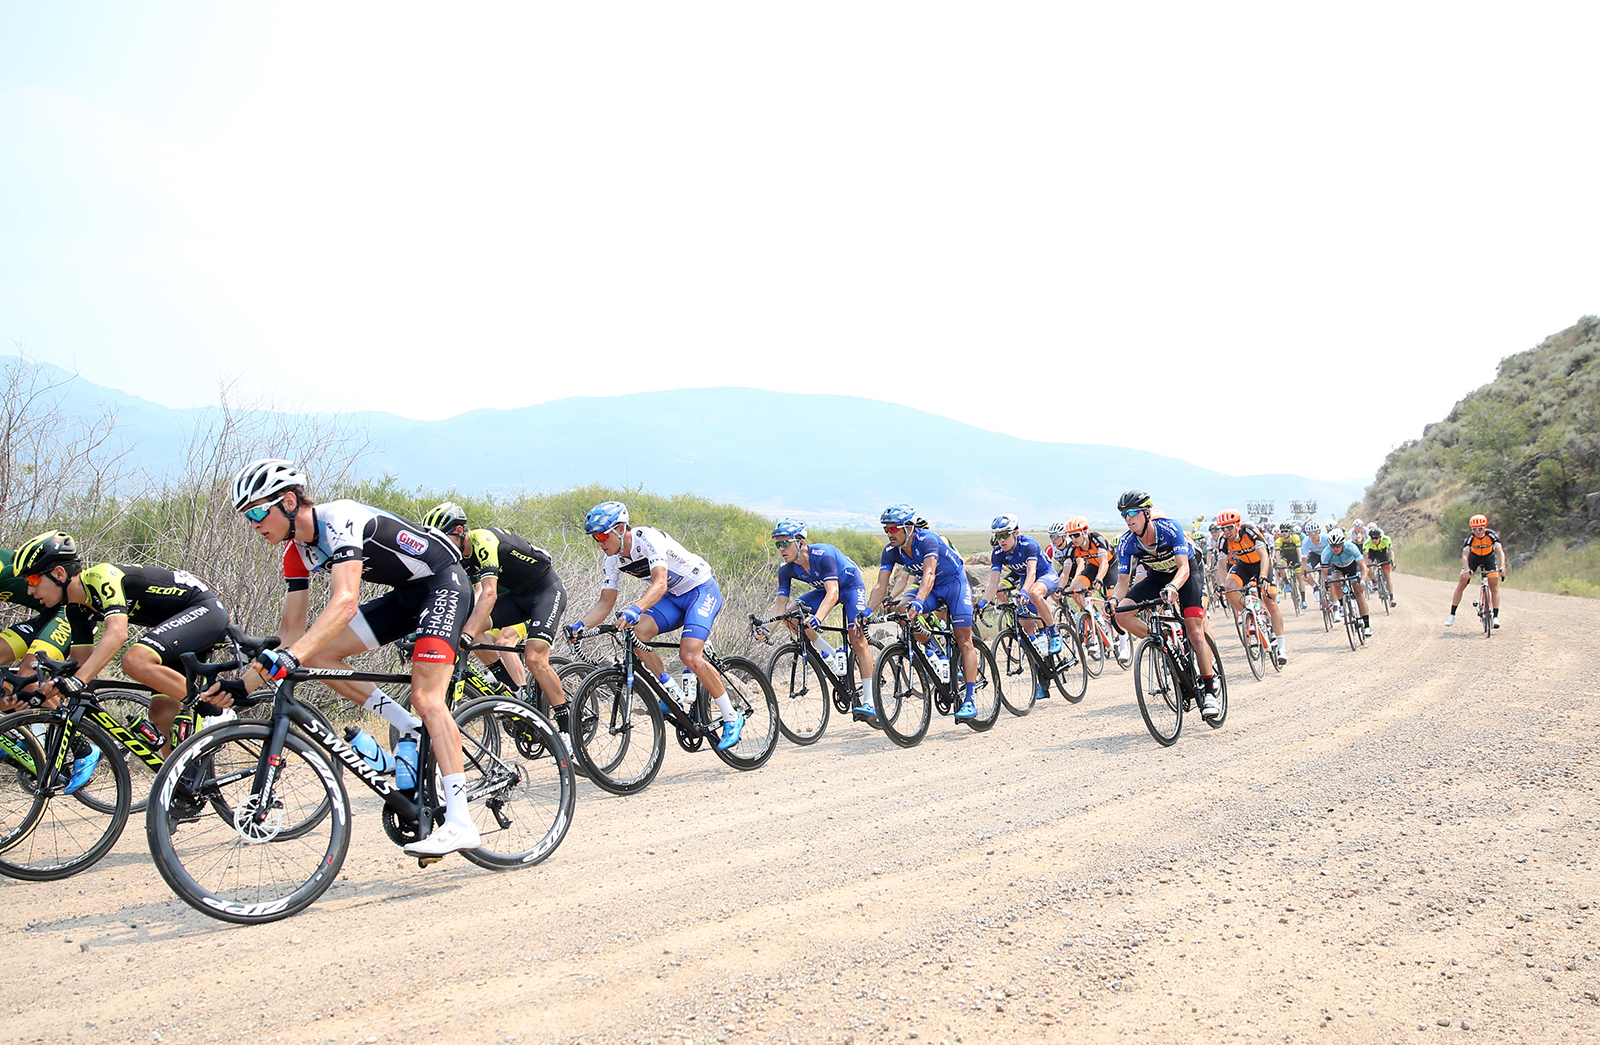 There were about 3 flats in the 2 mile gravel segment of the Queen Stage.  Stage 5 of the 2018 Tour of Utah, August 10, 2018. Photo by Cathy Fegan-Kim, www.cottonsoxphotography.net